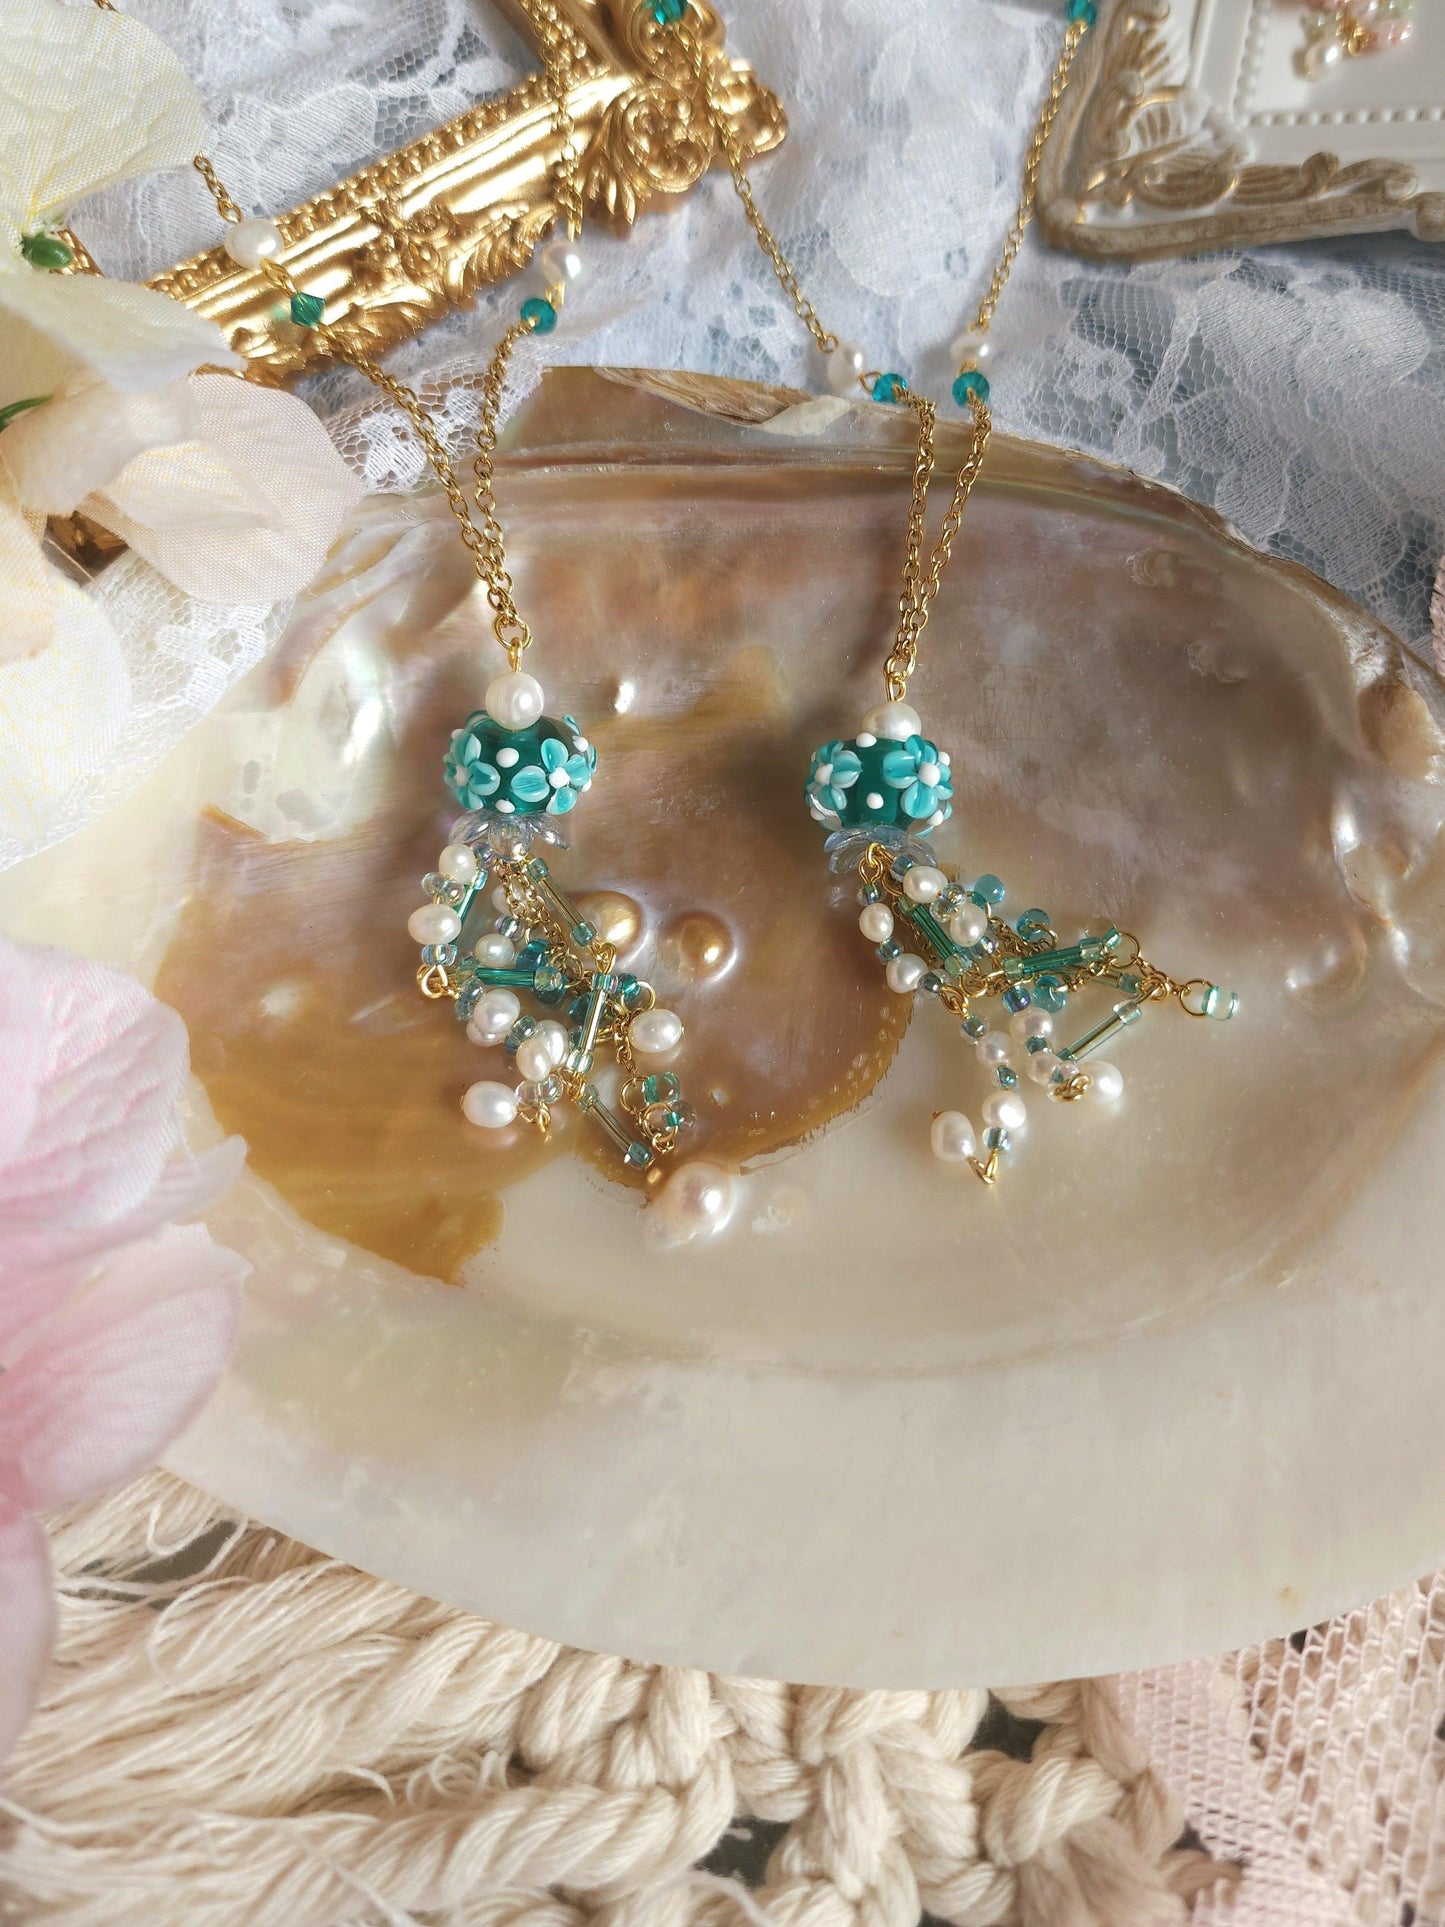 Blue Jellyfish Necklace - By Cocoyu